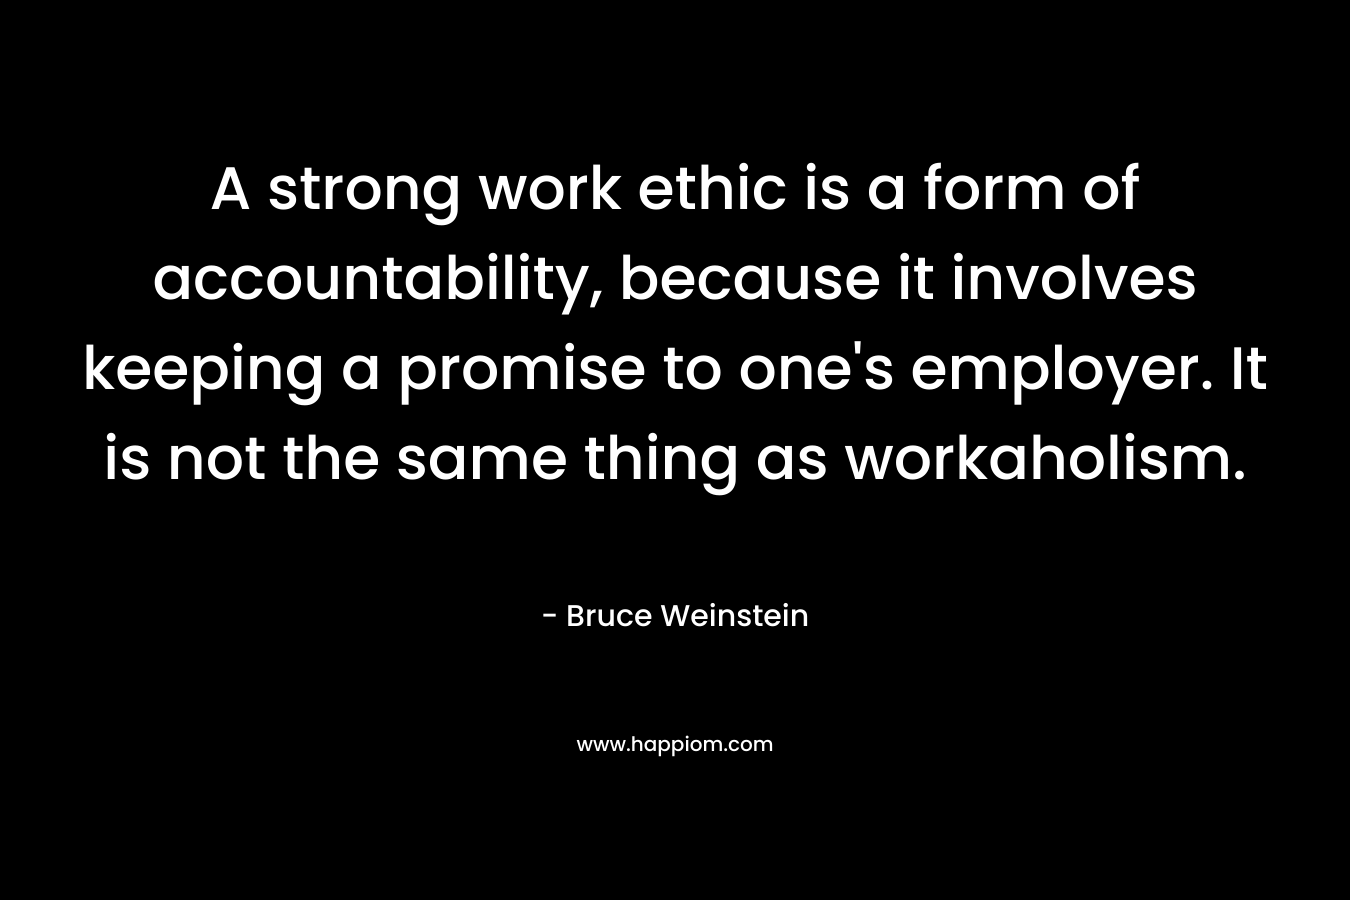 A strong work ethic is a form of accountability, because it involves keeping a promise to one’s employer. It is not the same thing as workaholism. – Bruce Weinstein